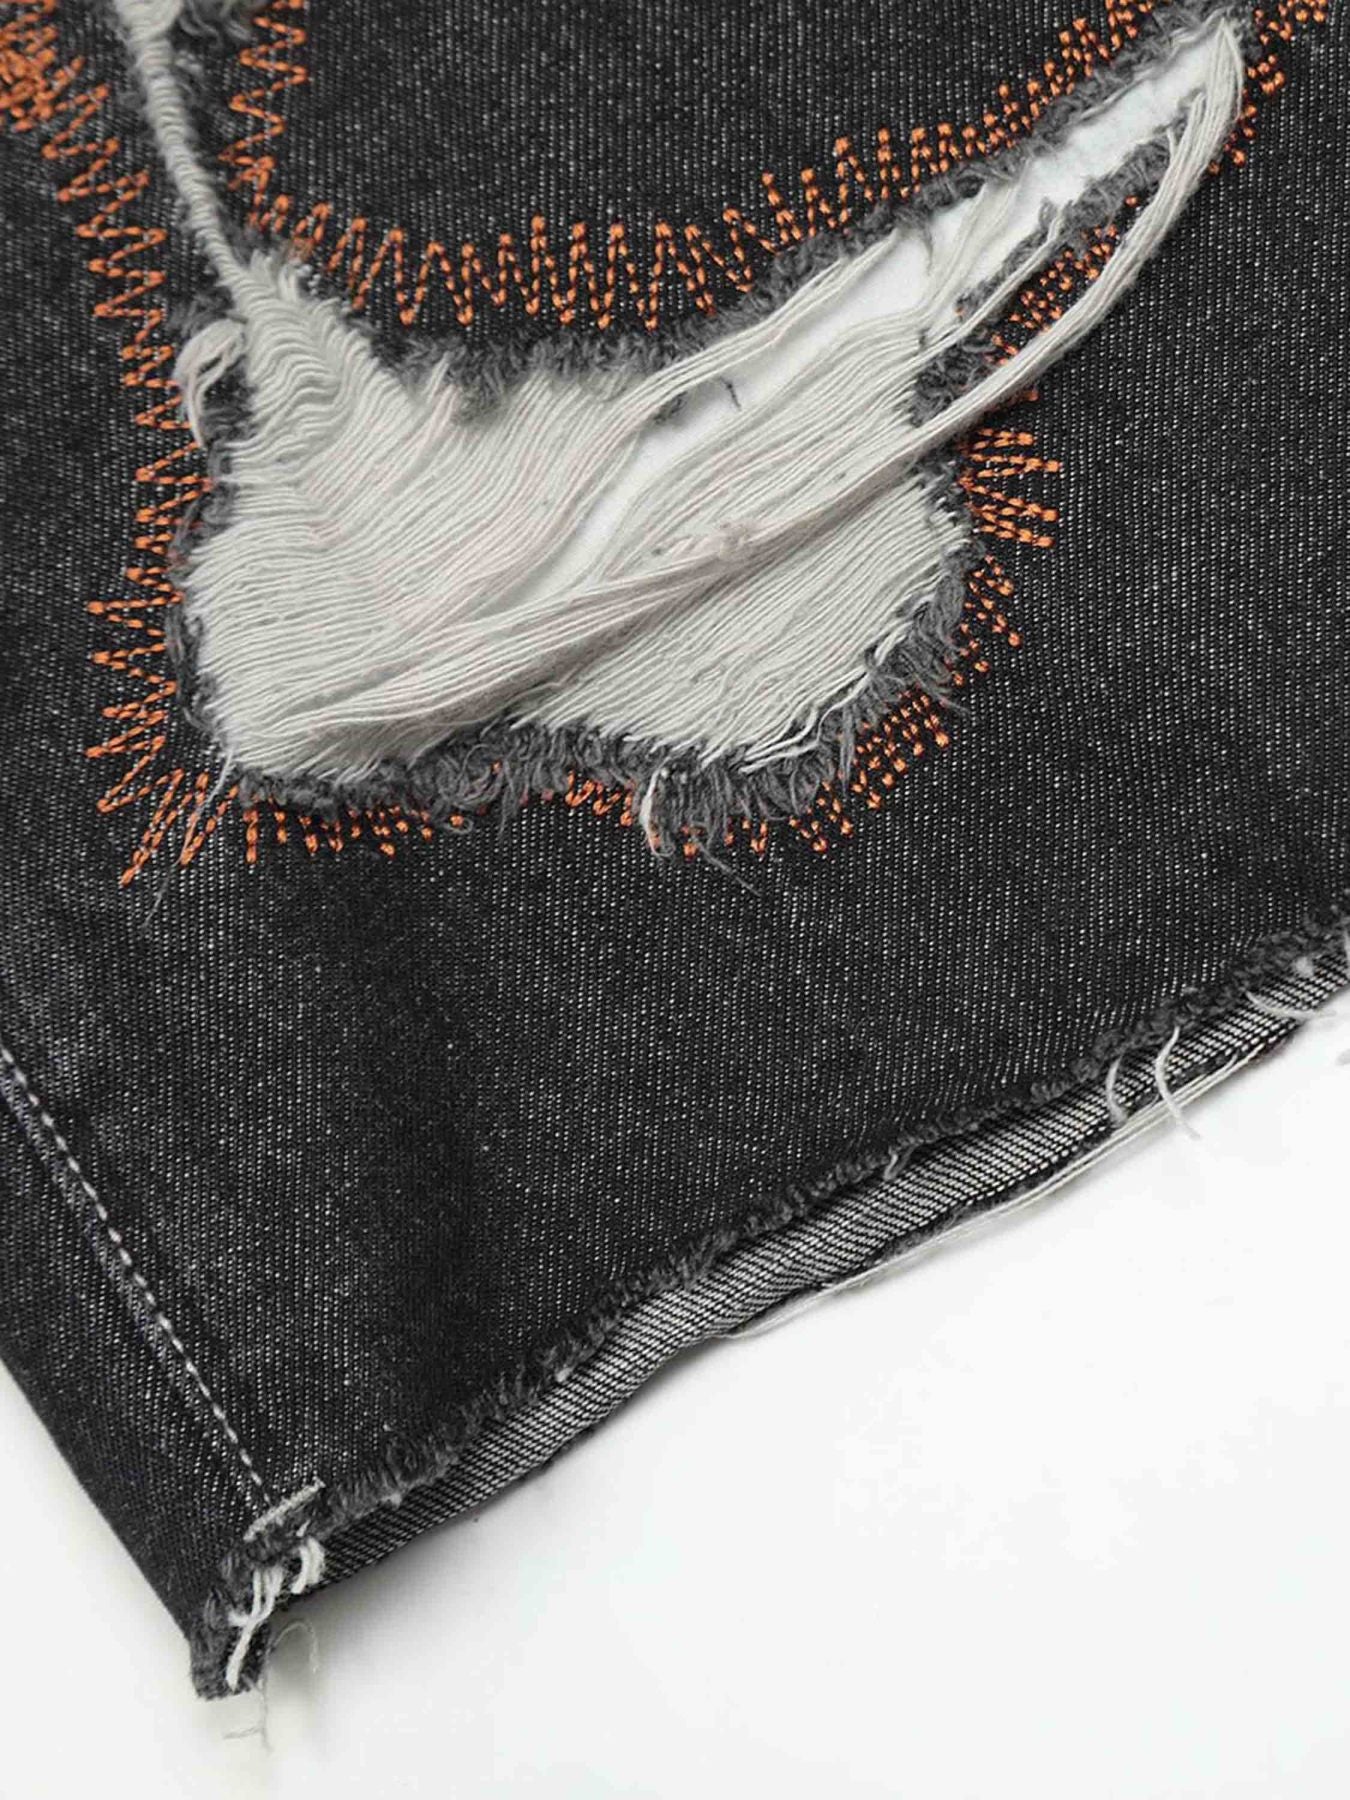 Thesupermade American Style Worn And Torn Embroidered Jeans